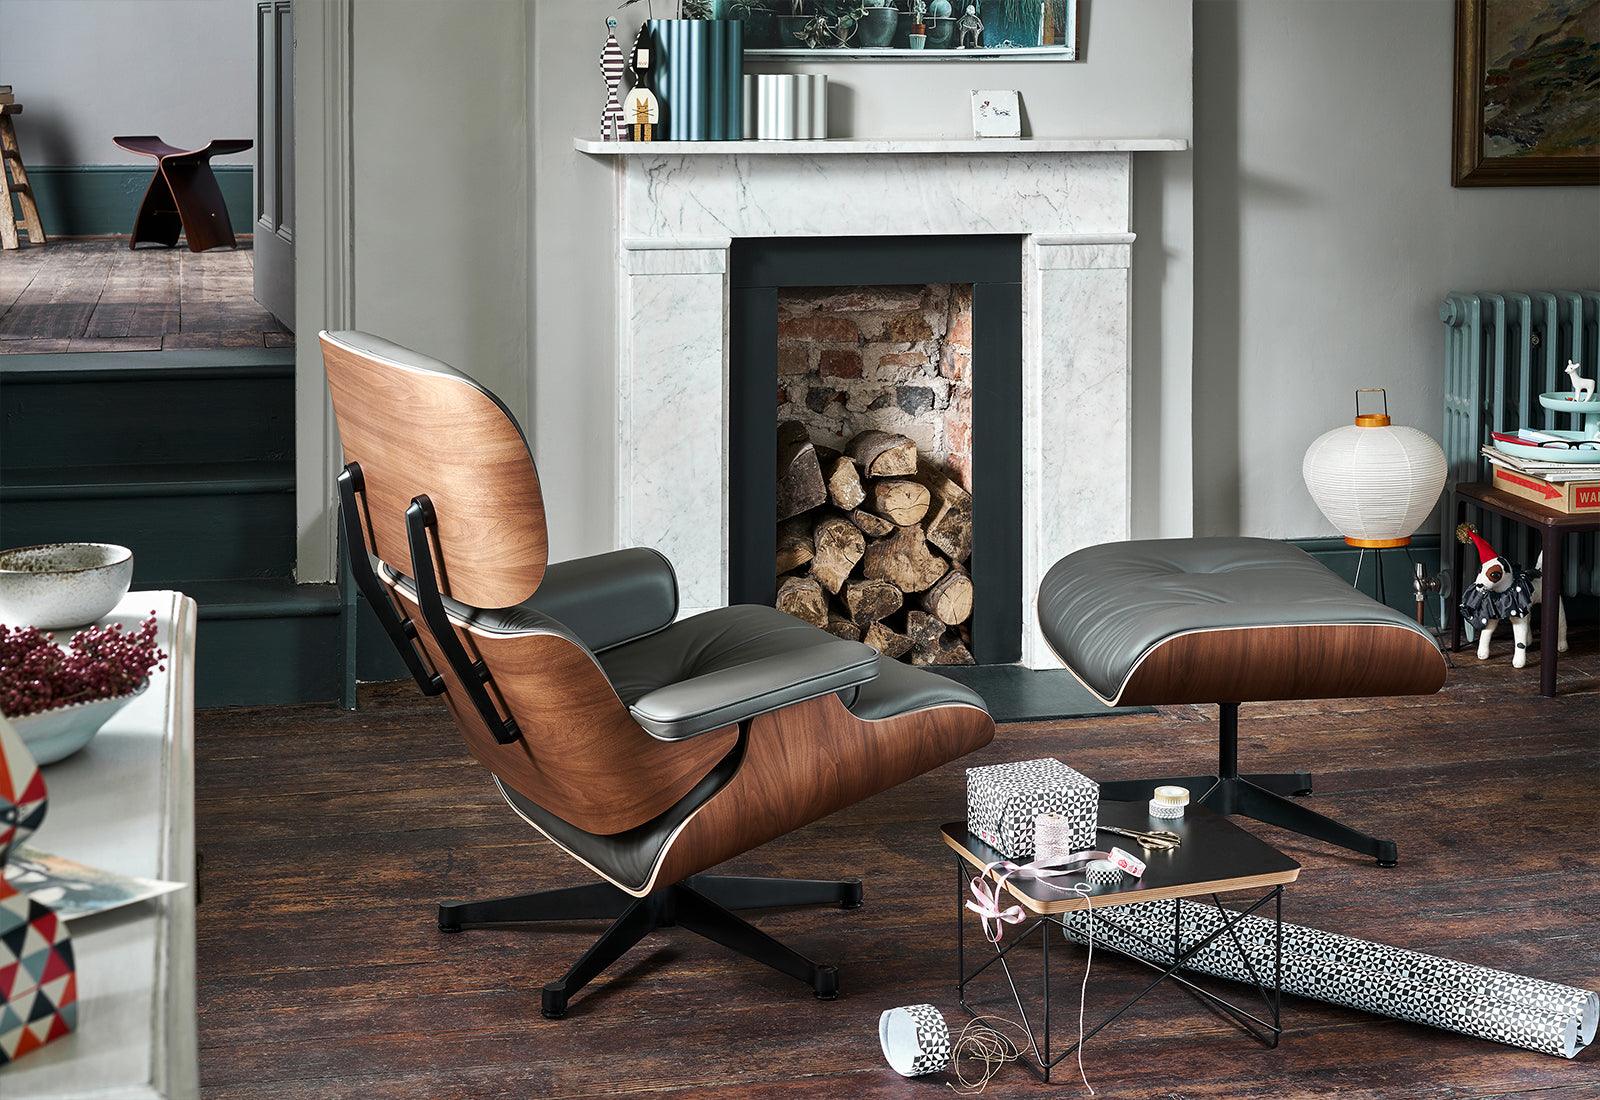 Eames lounge chair - Classic, 1956